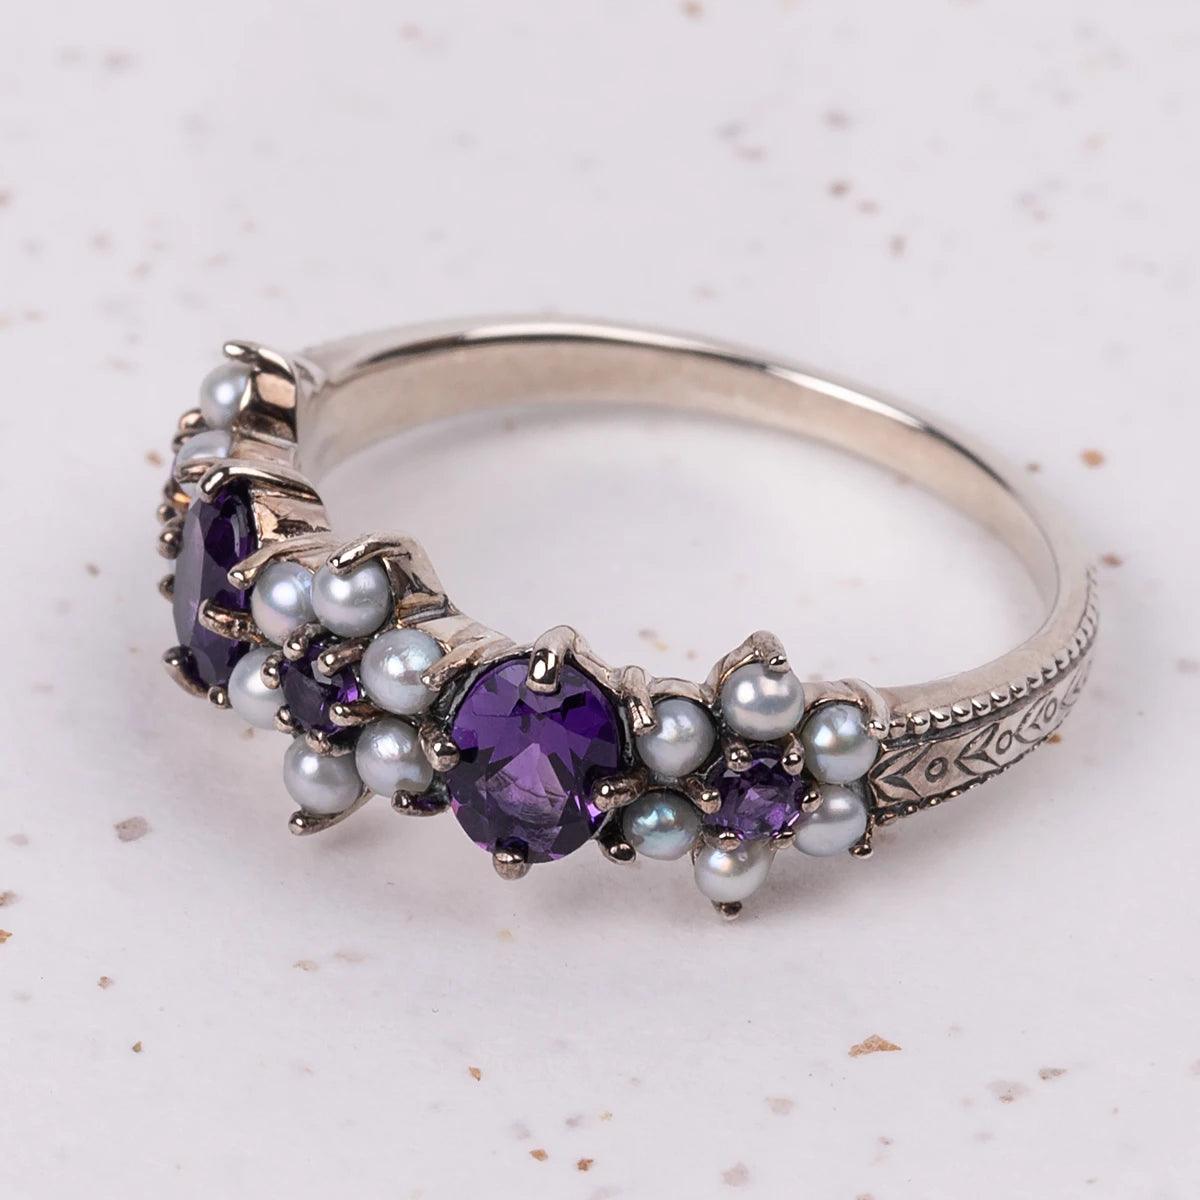 Charlotte Ring - Amethyst and Freshwater Pearl - JaneAusten.co.uk